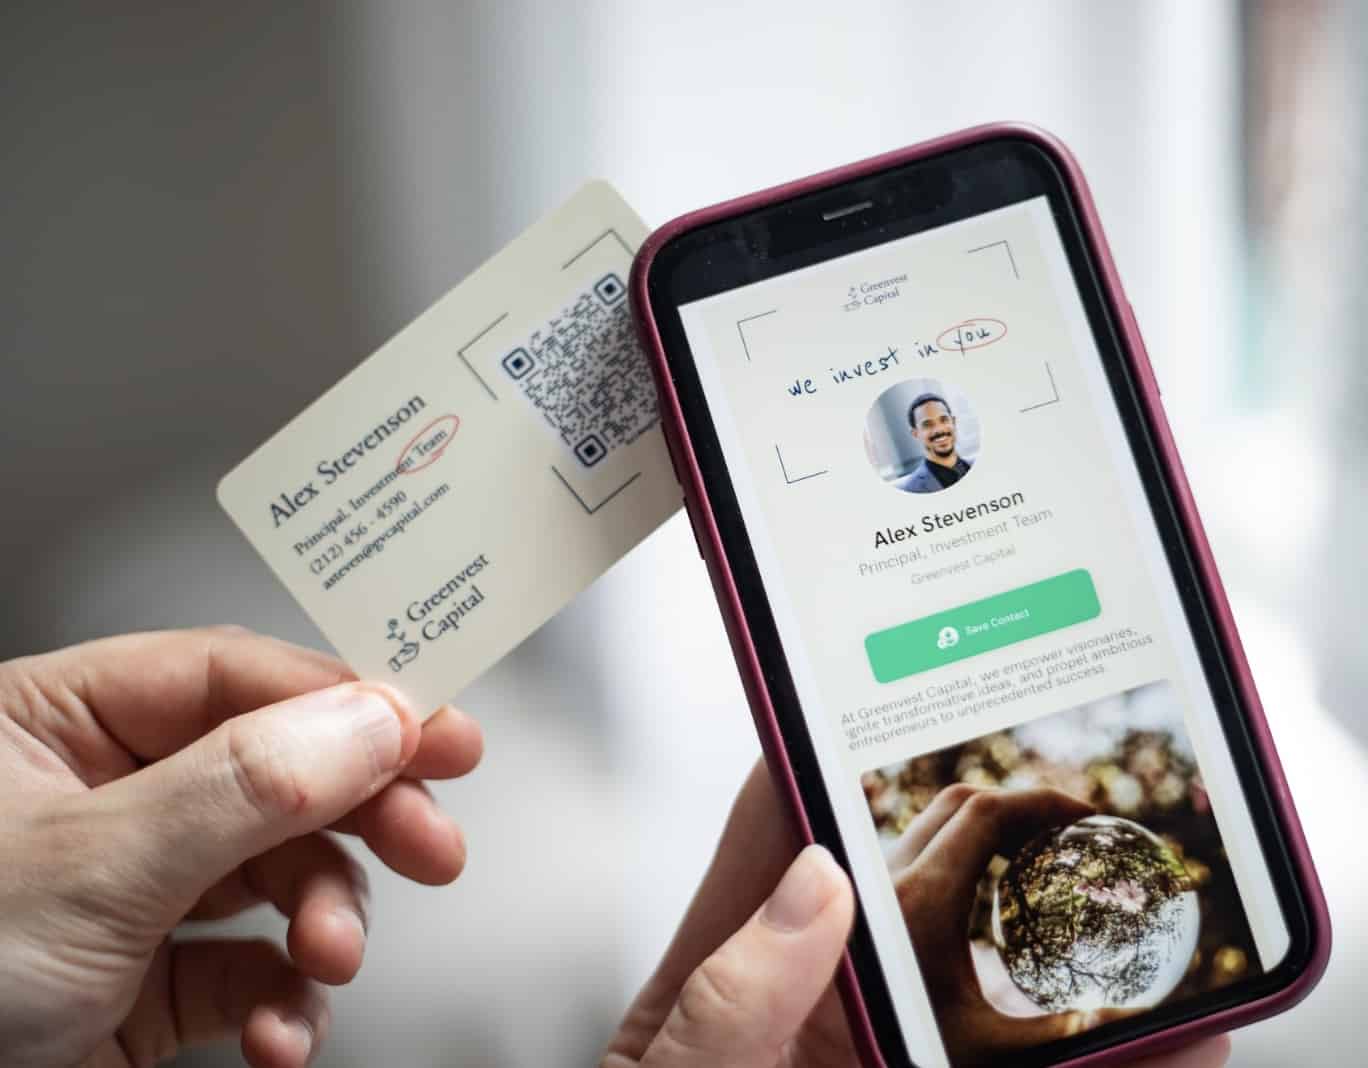 Mobilo business card in use